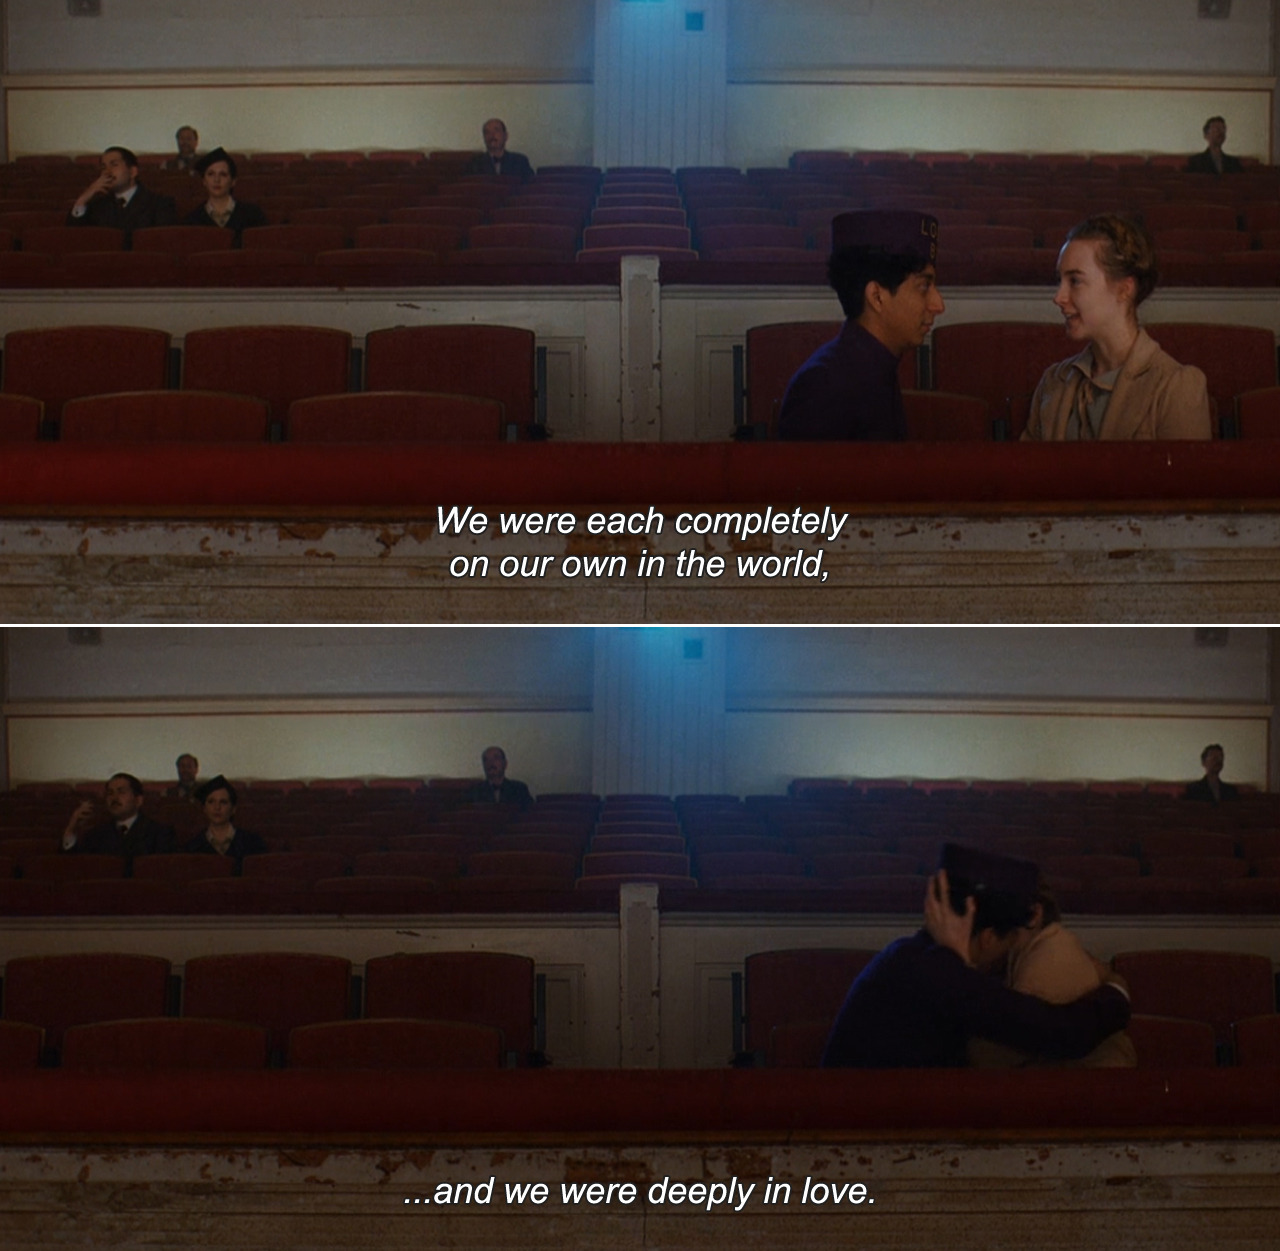  ― The Grand Budapest Hotel (2014) Zero: We were each completely on our own in